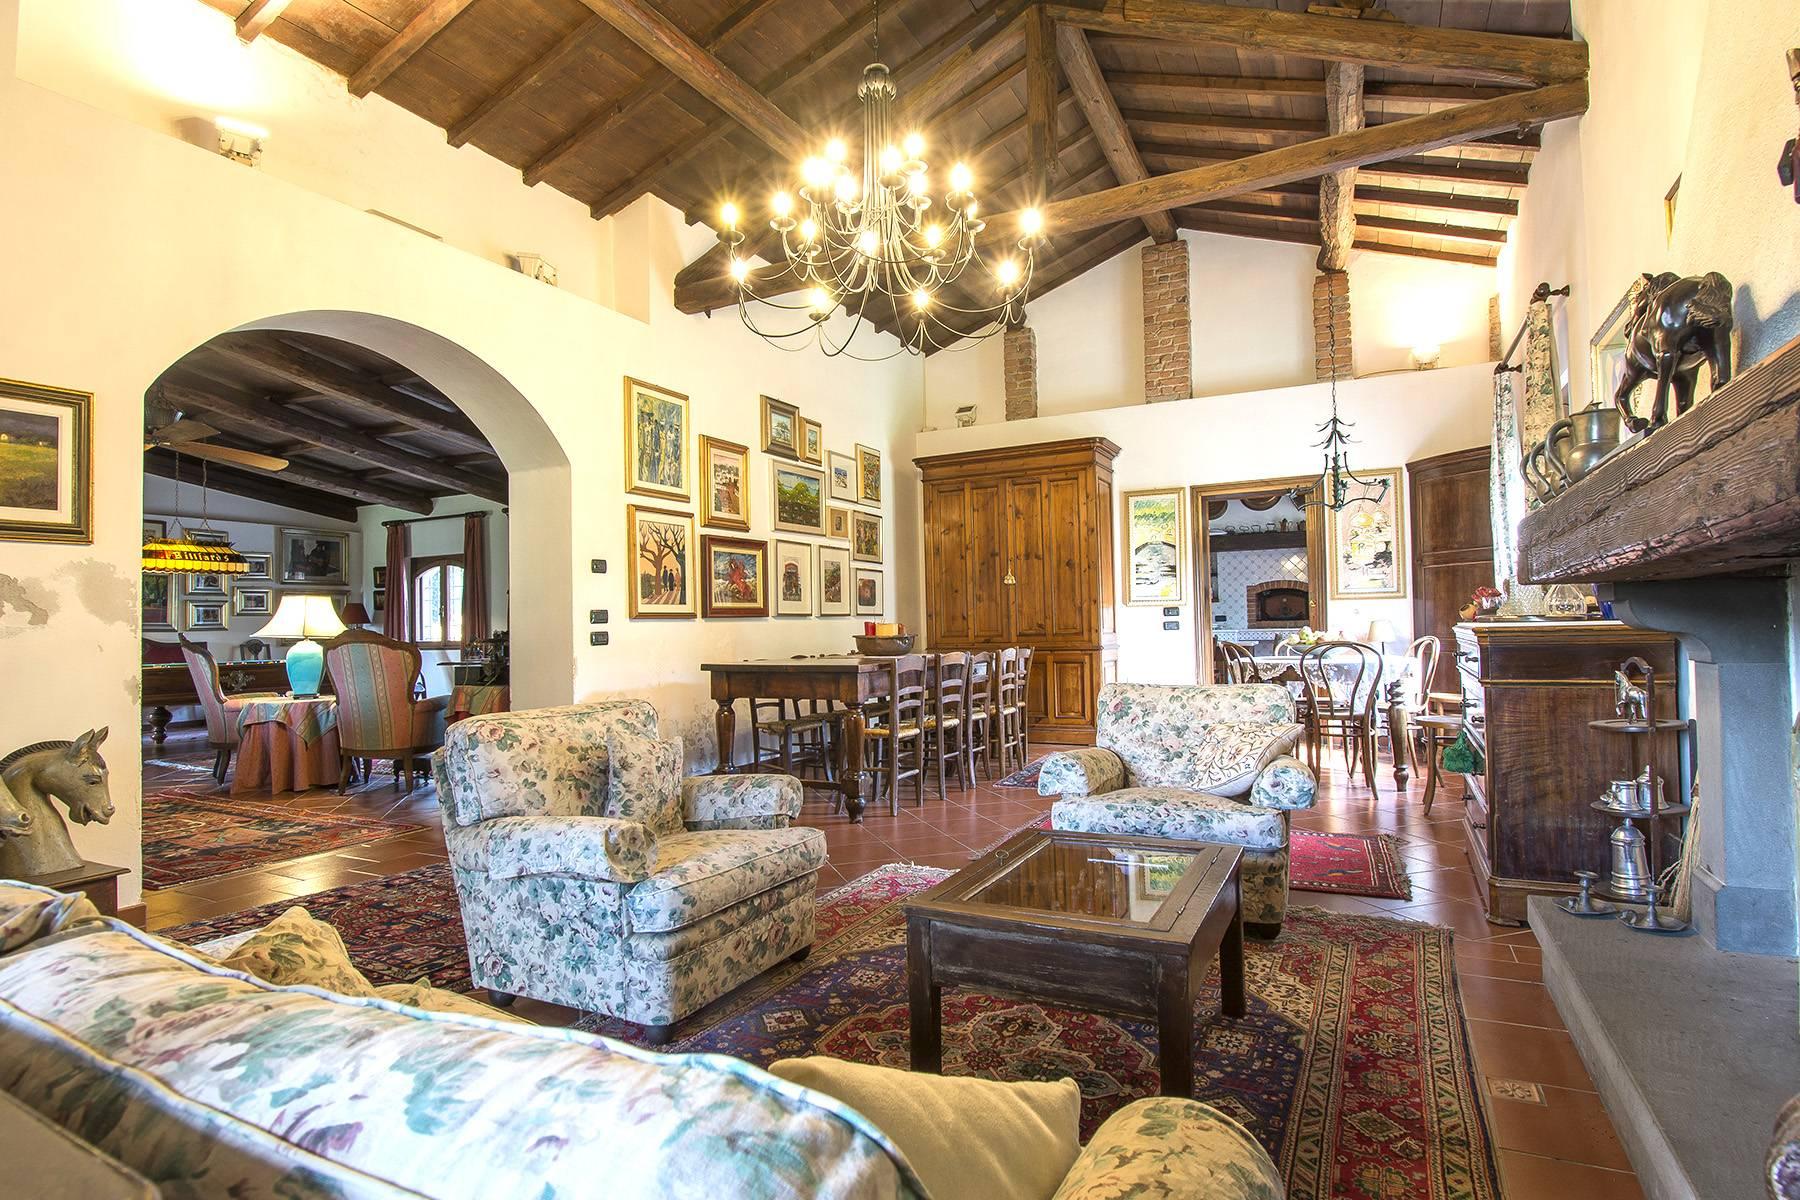 Equestrian farmhouse in the Tuscan countryside - 9